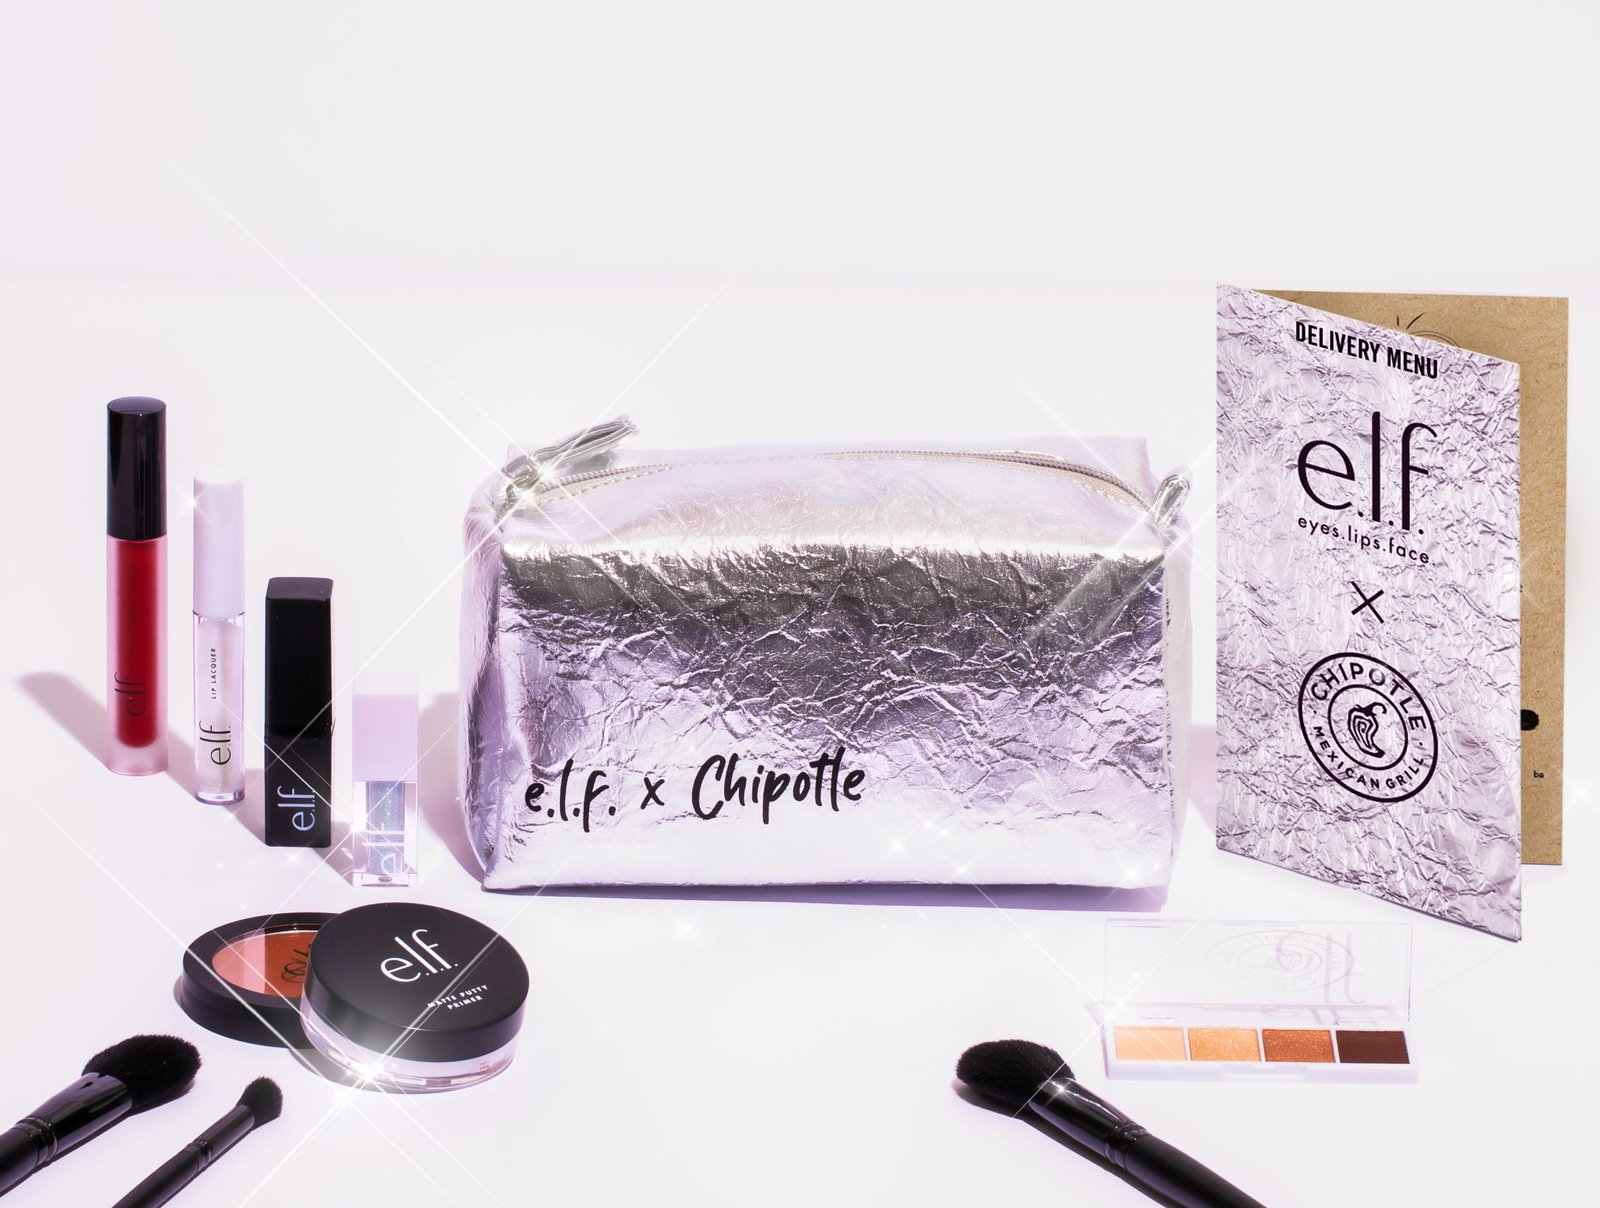 E.L.F. x Chipotle Is the Epic Collab I Didn’t Know I Needed